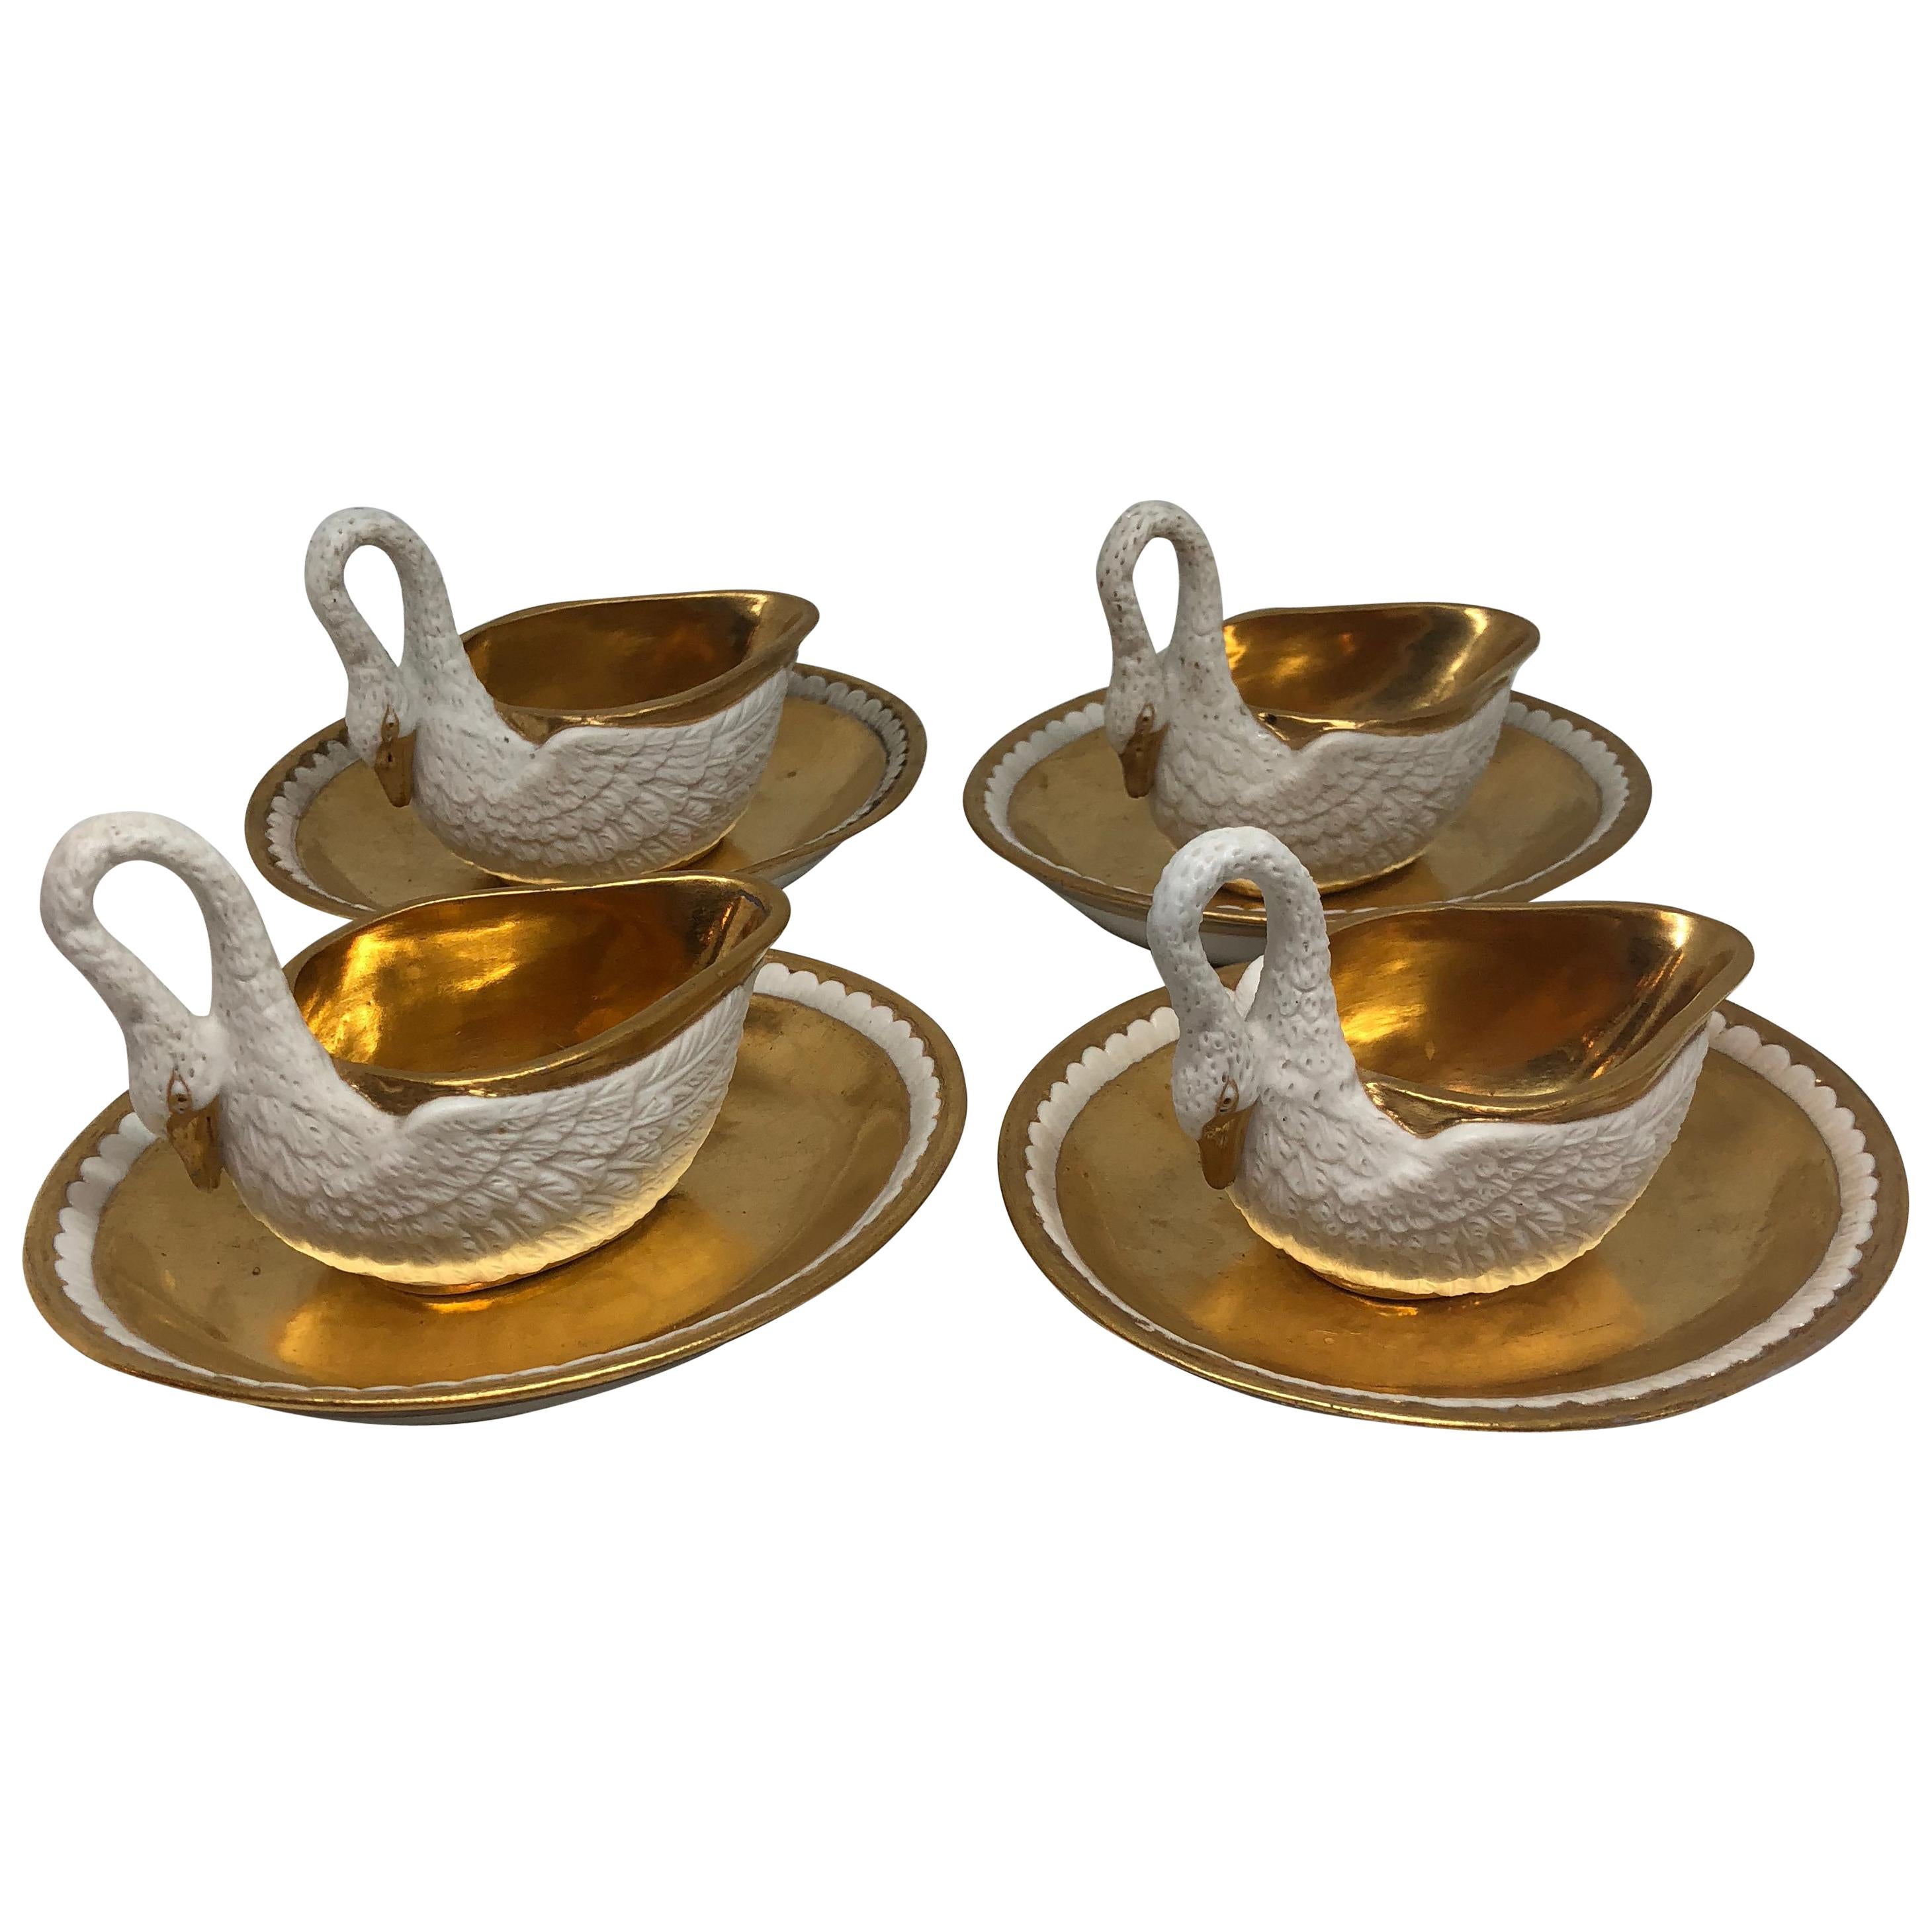 Two Pairs of Period Empire Bisque Porcelain And Gilt Swan Cups